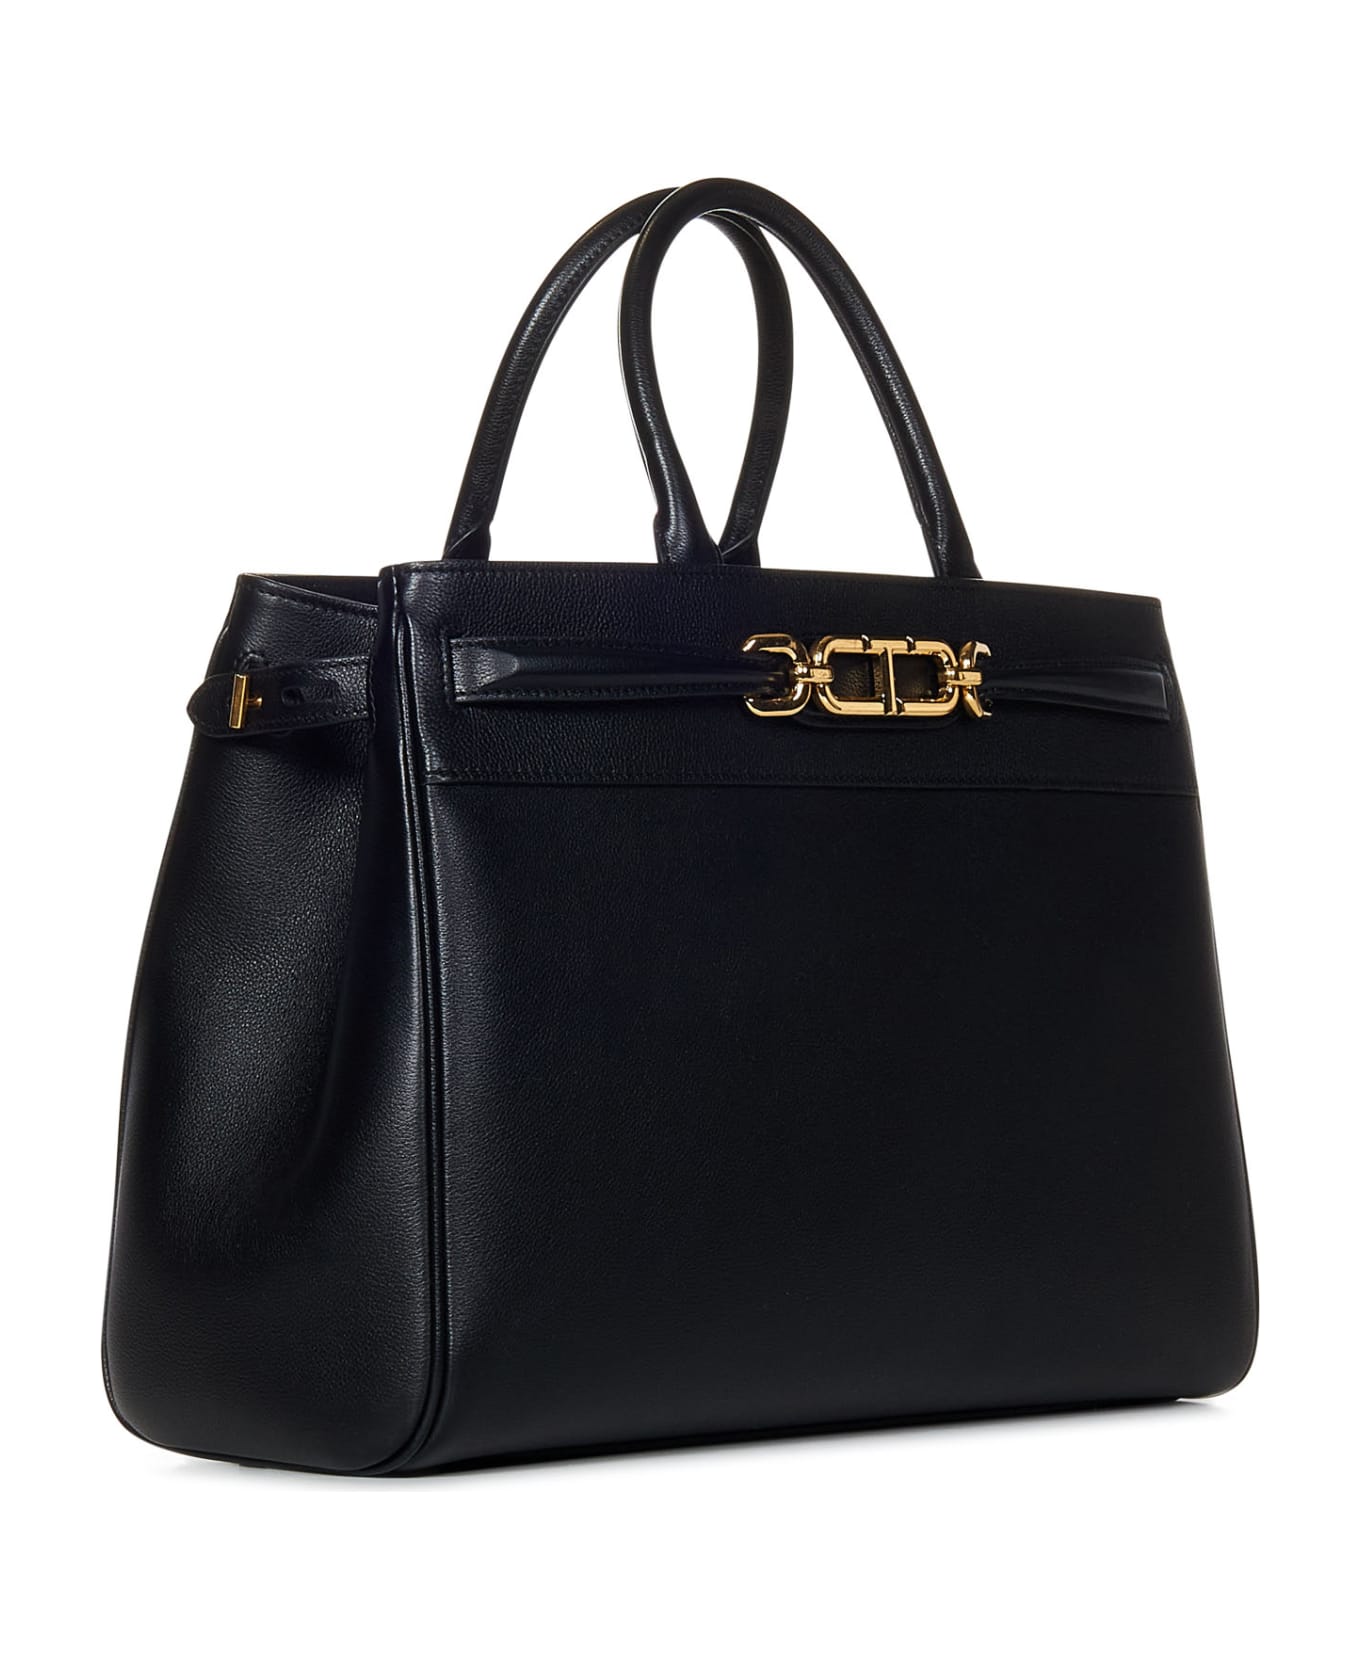 Tom Ford Whitney Large Tote - BLACK